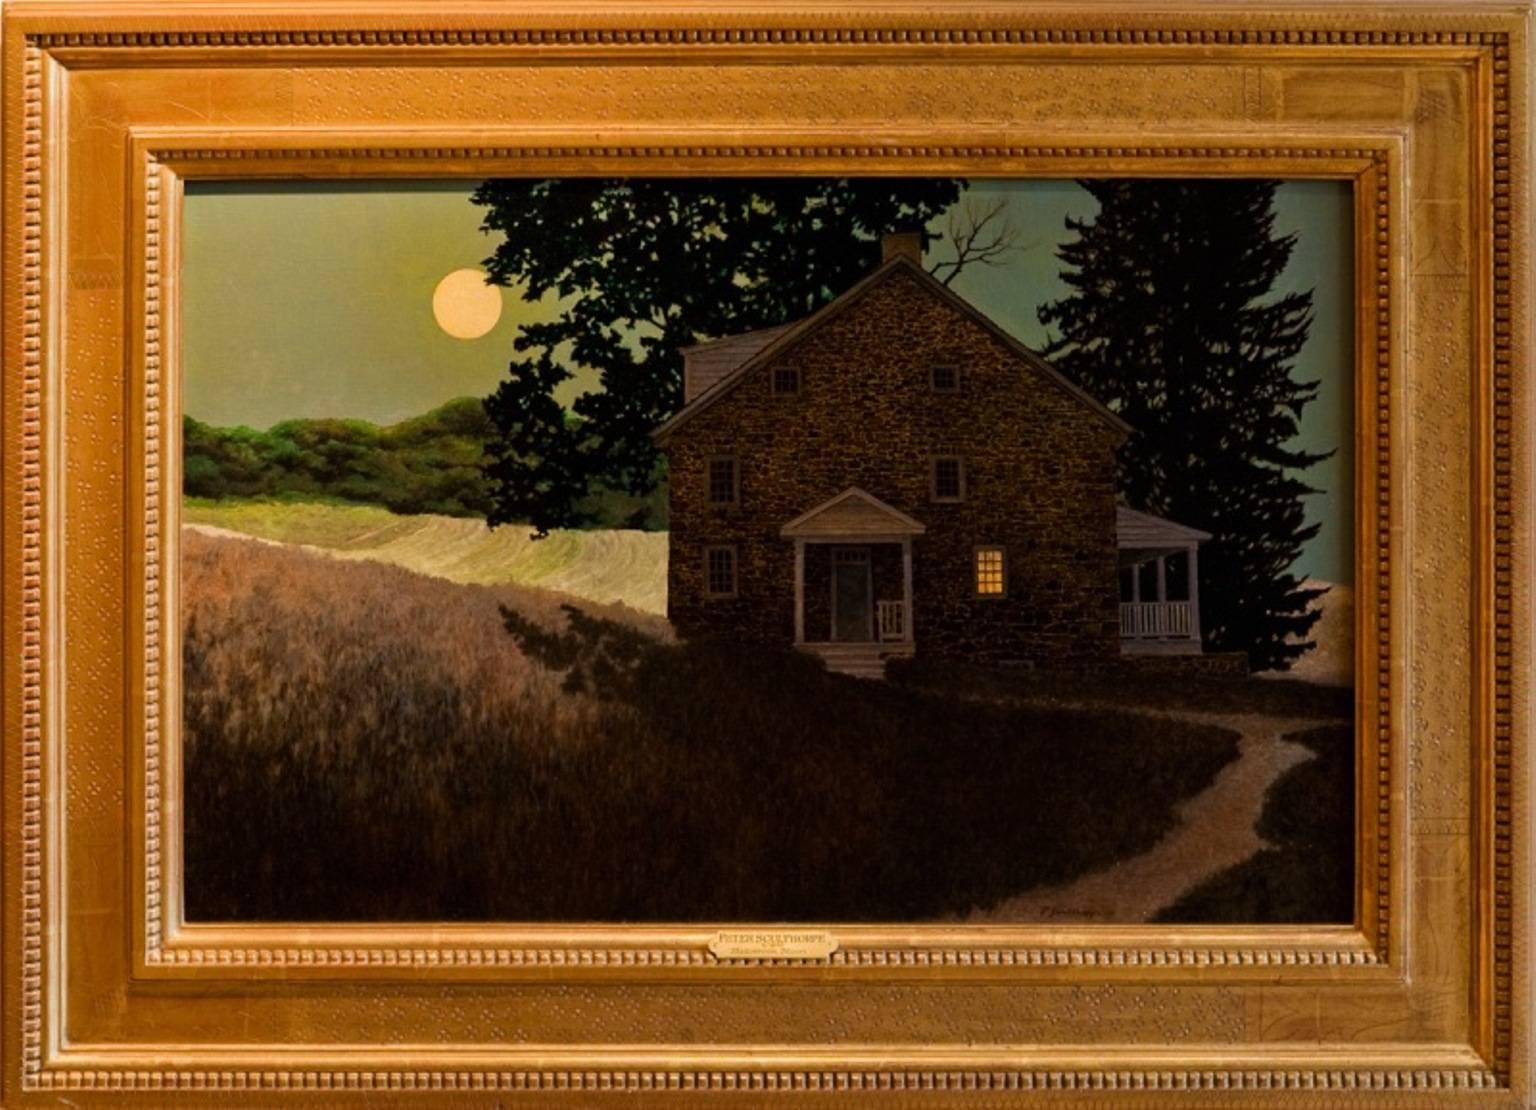 Peter Sculthorpe Landscape Painting - "Halloween Moon"